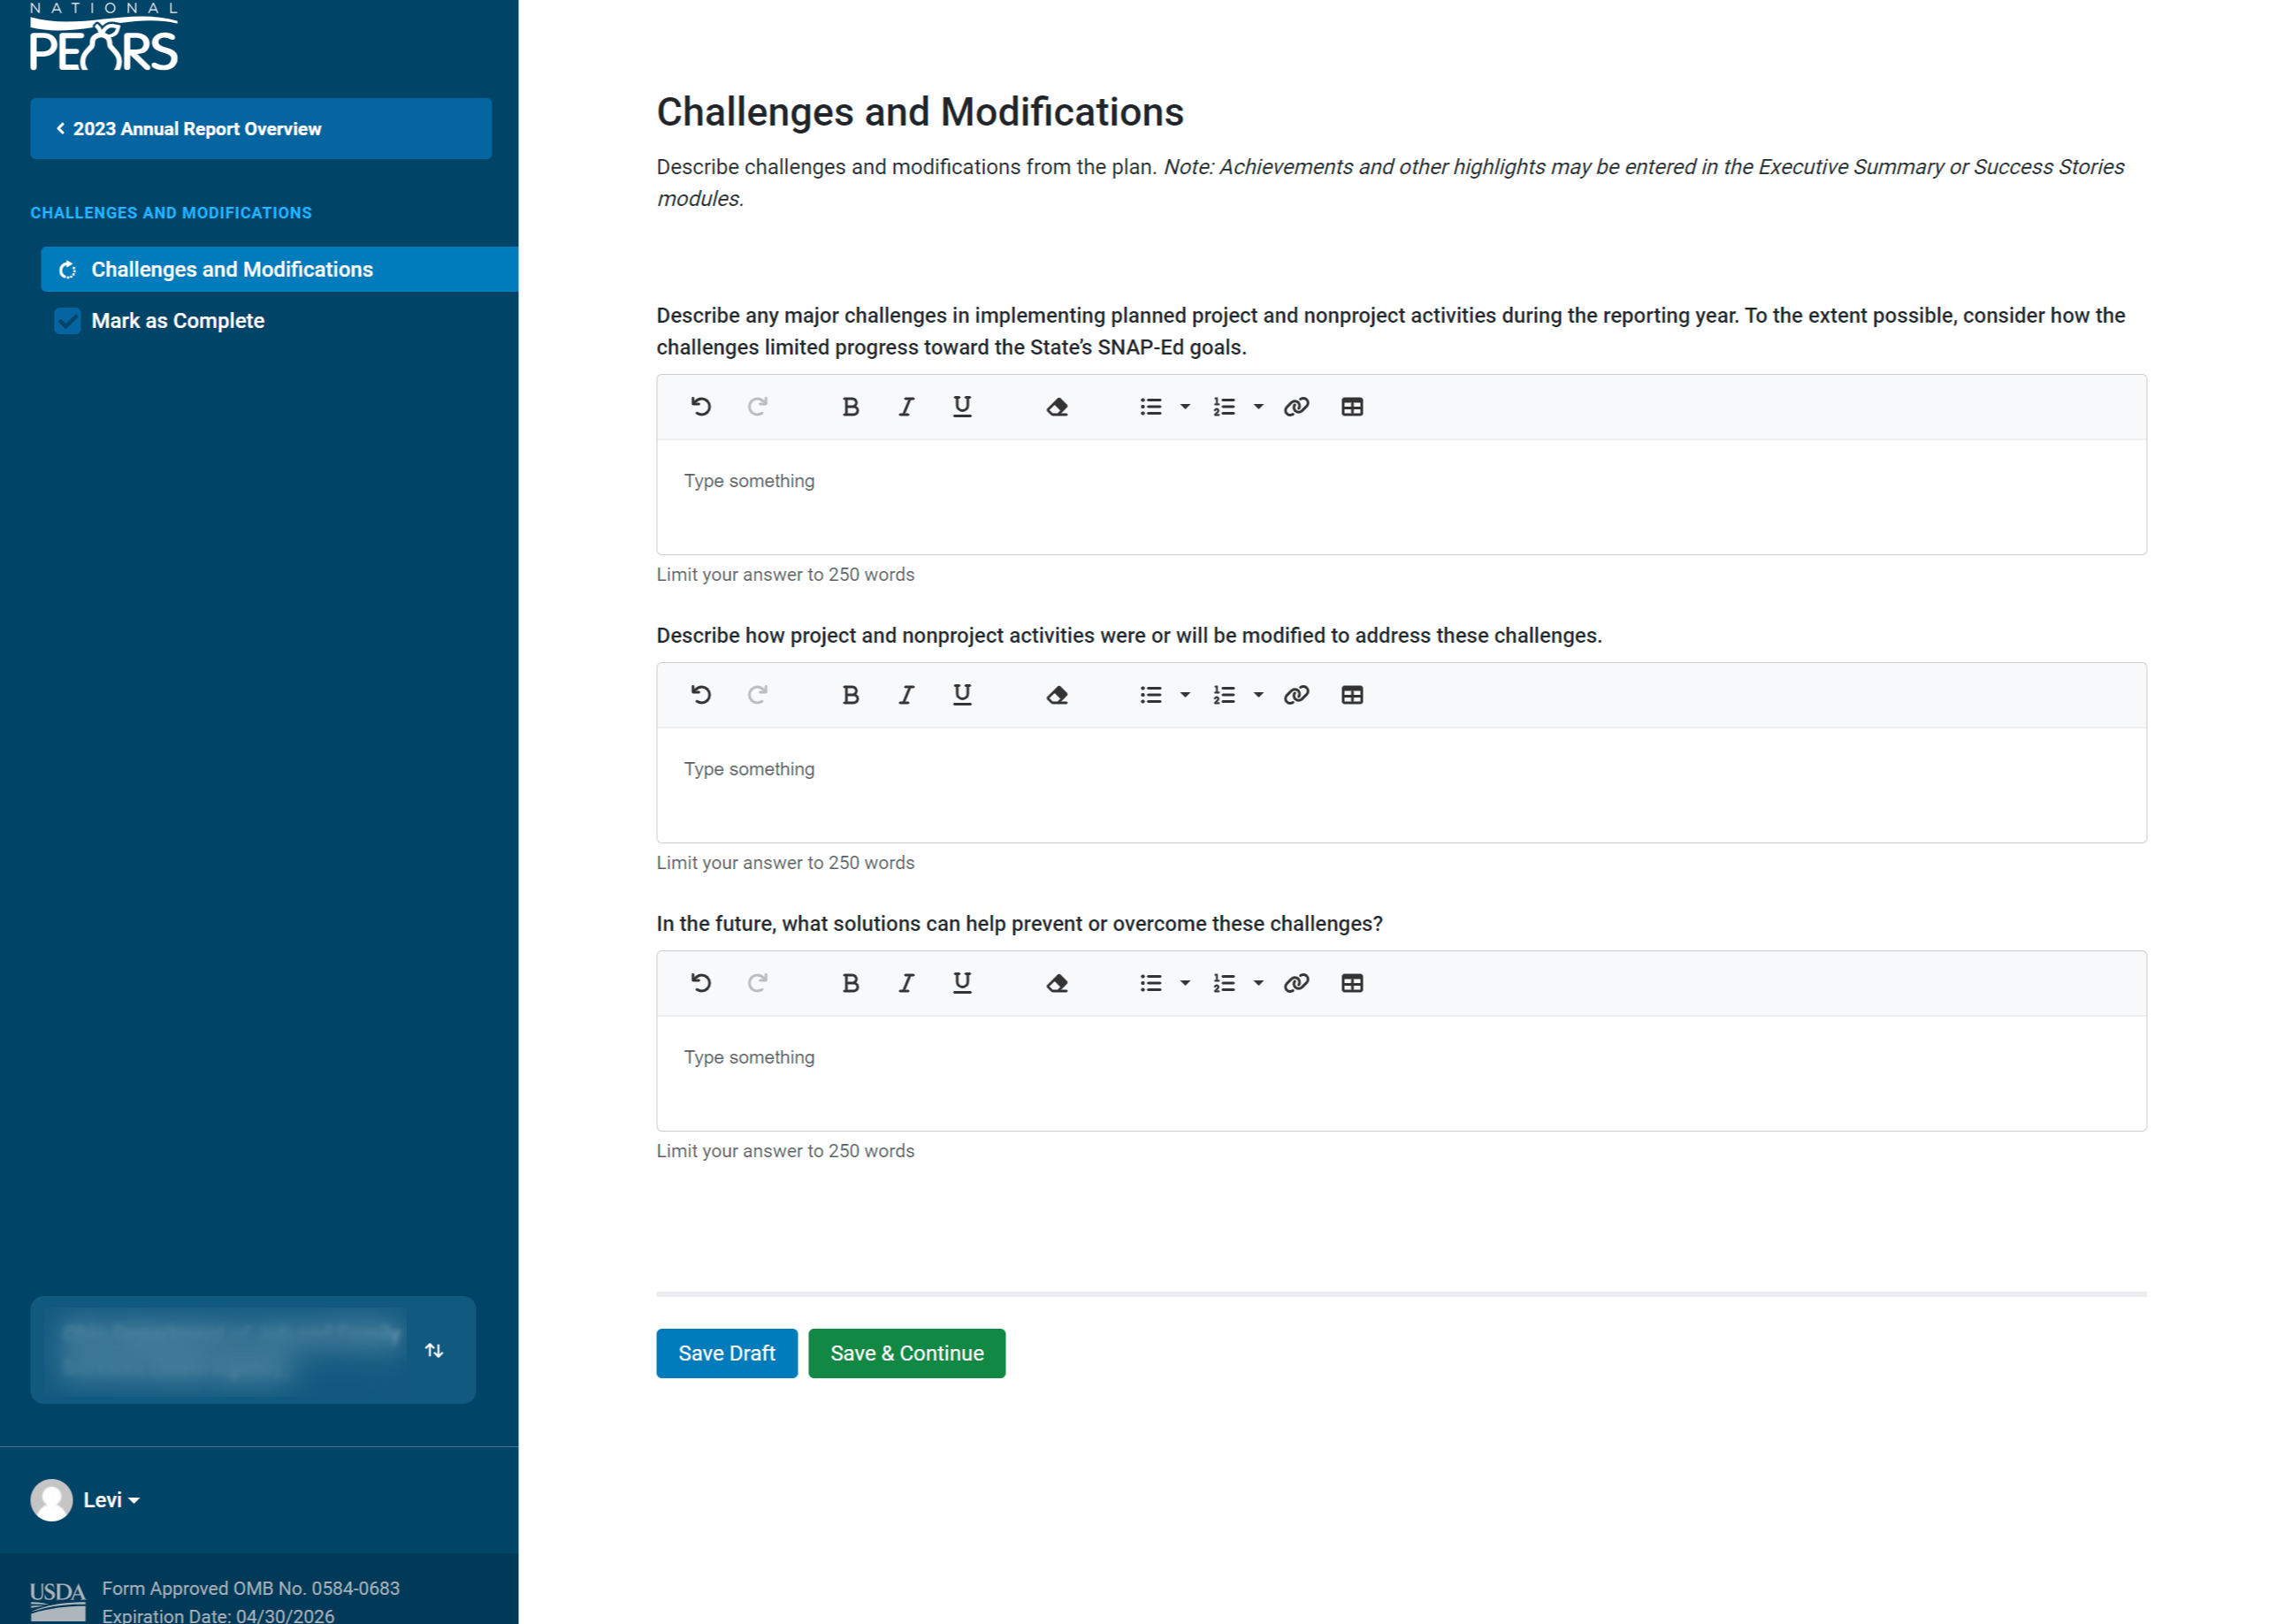 Challenges and Modifications section.